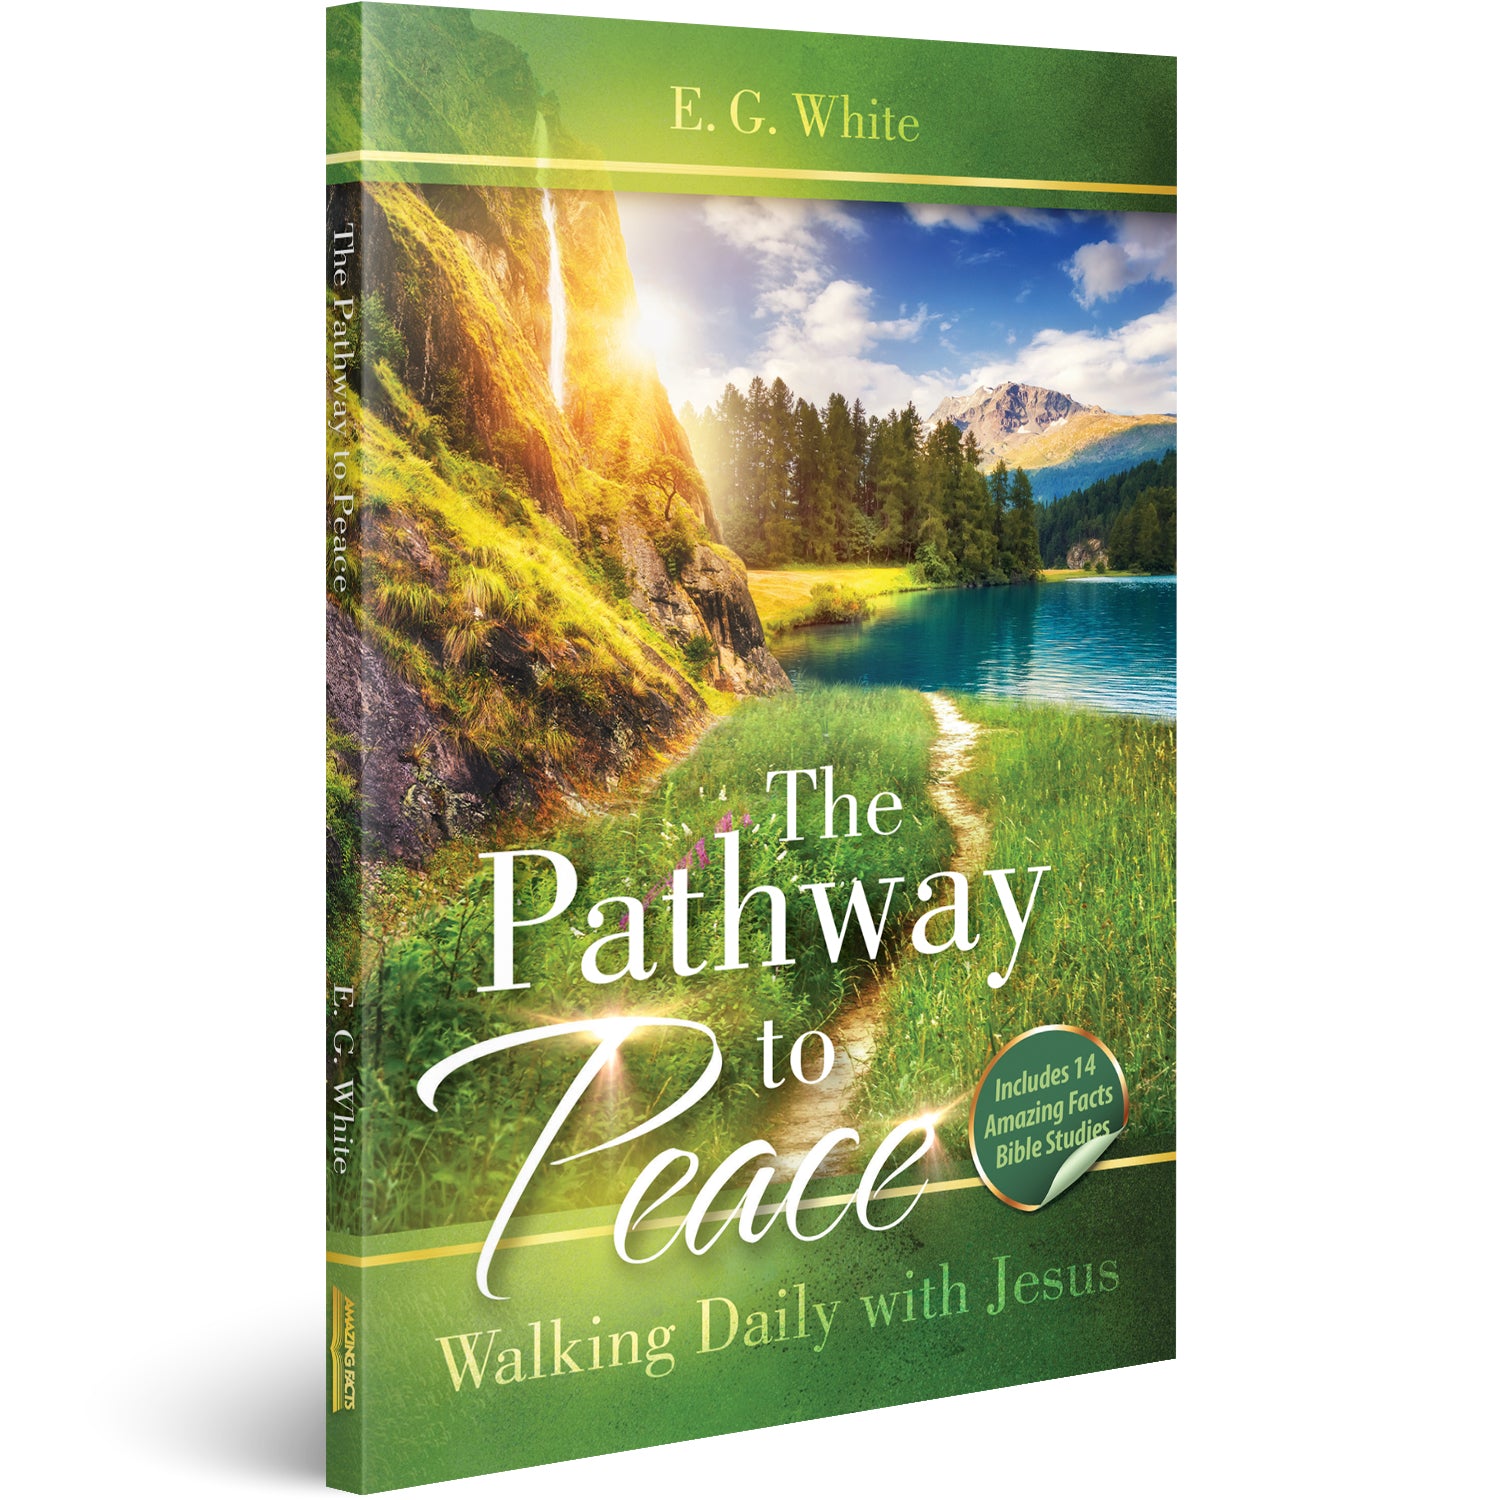 The Pathway to Peace: Walking Daily with Jesus (Includes 14 Amazing Facts Bible Studies!)